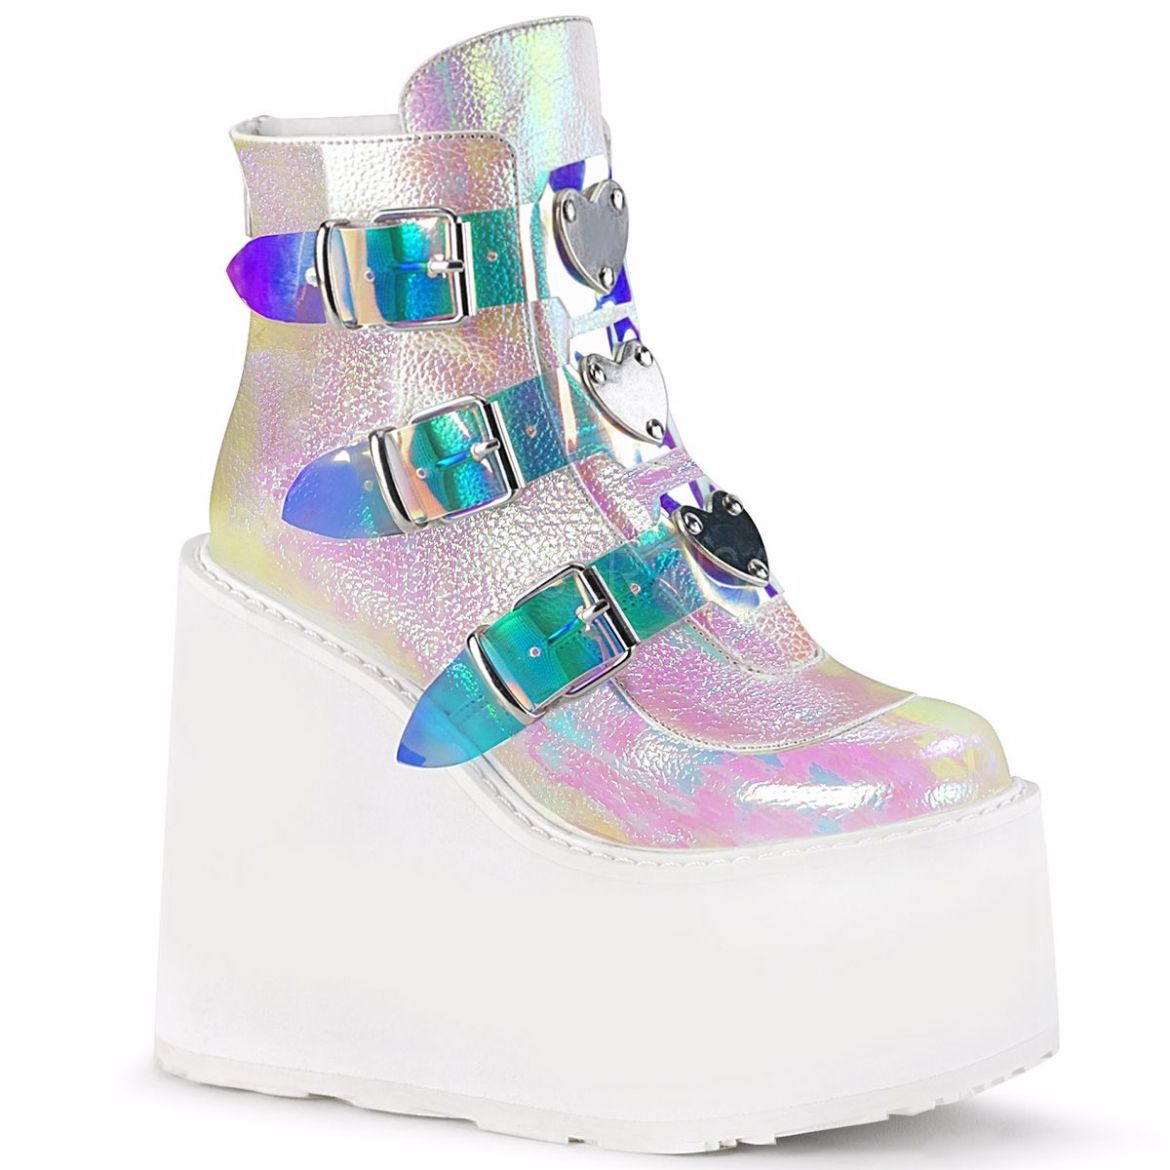 Product image of Demonia SWING-105 Pearl Iridescent Vegan Faux Leather 5 1/2 inch Platform Ankle Boot With  3 Buckles Straps Back Metal Zip